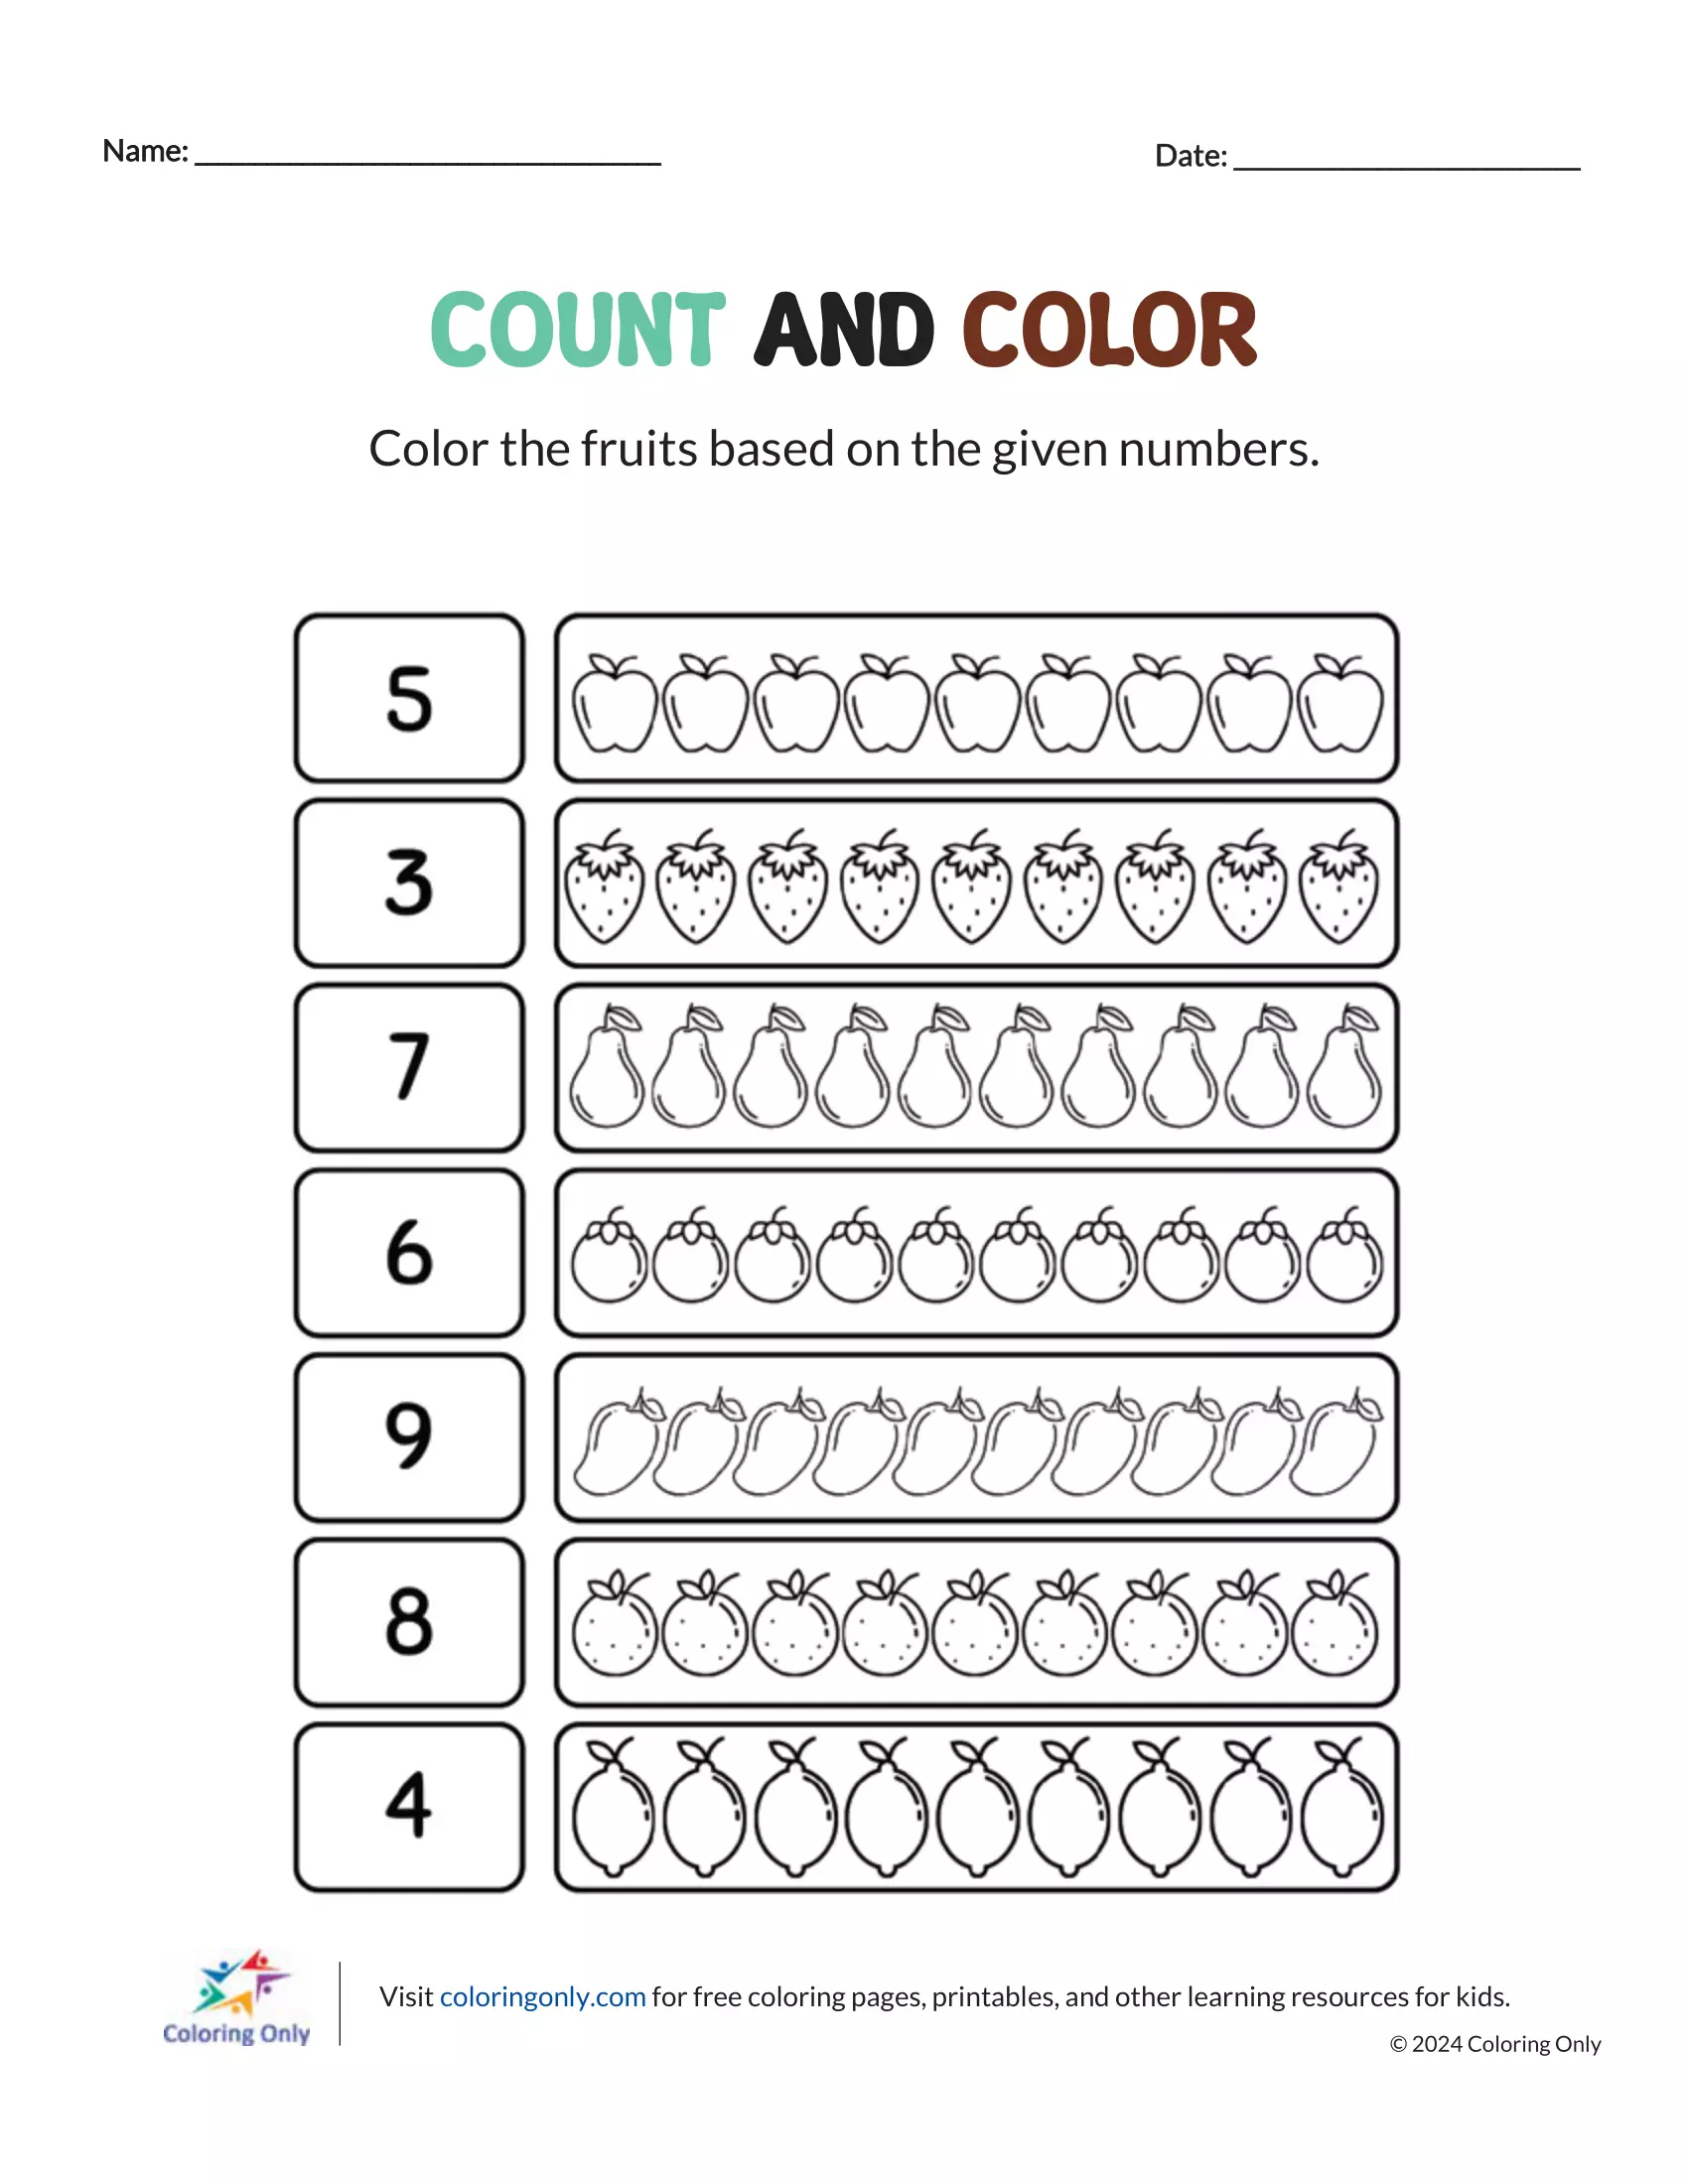 COUNT AND COLOR Free Printable Worksheet